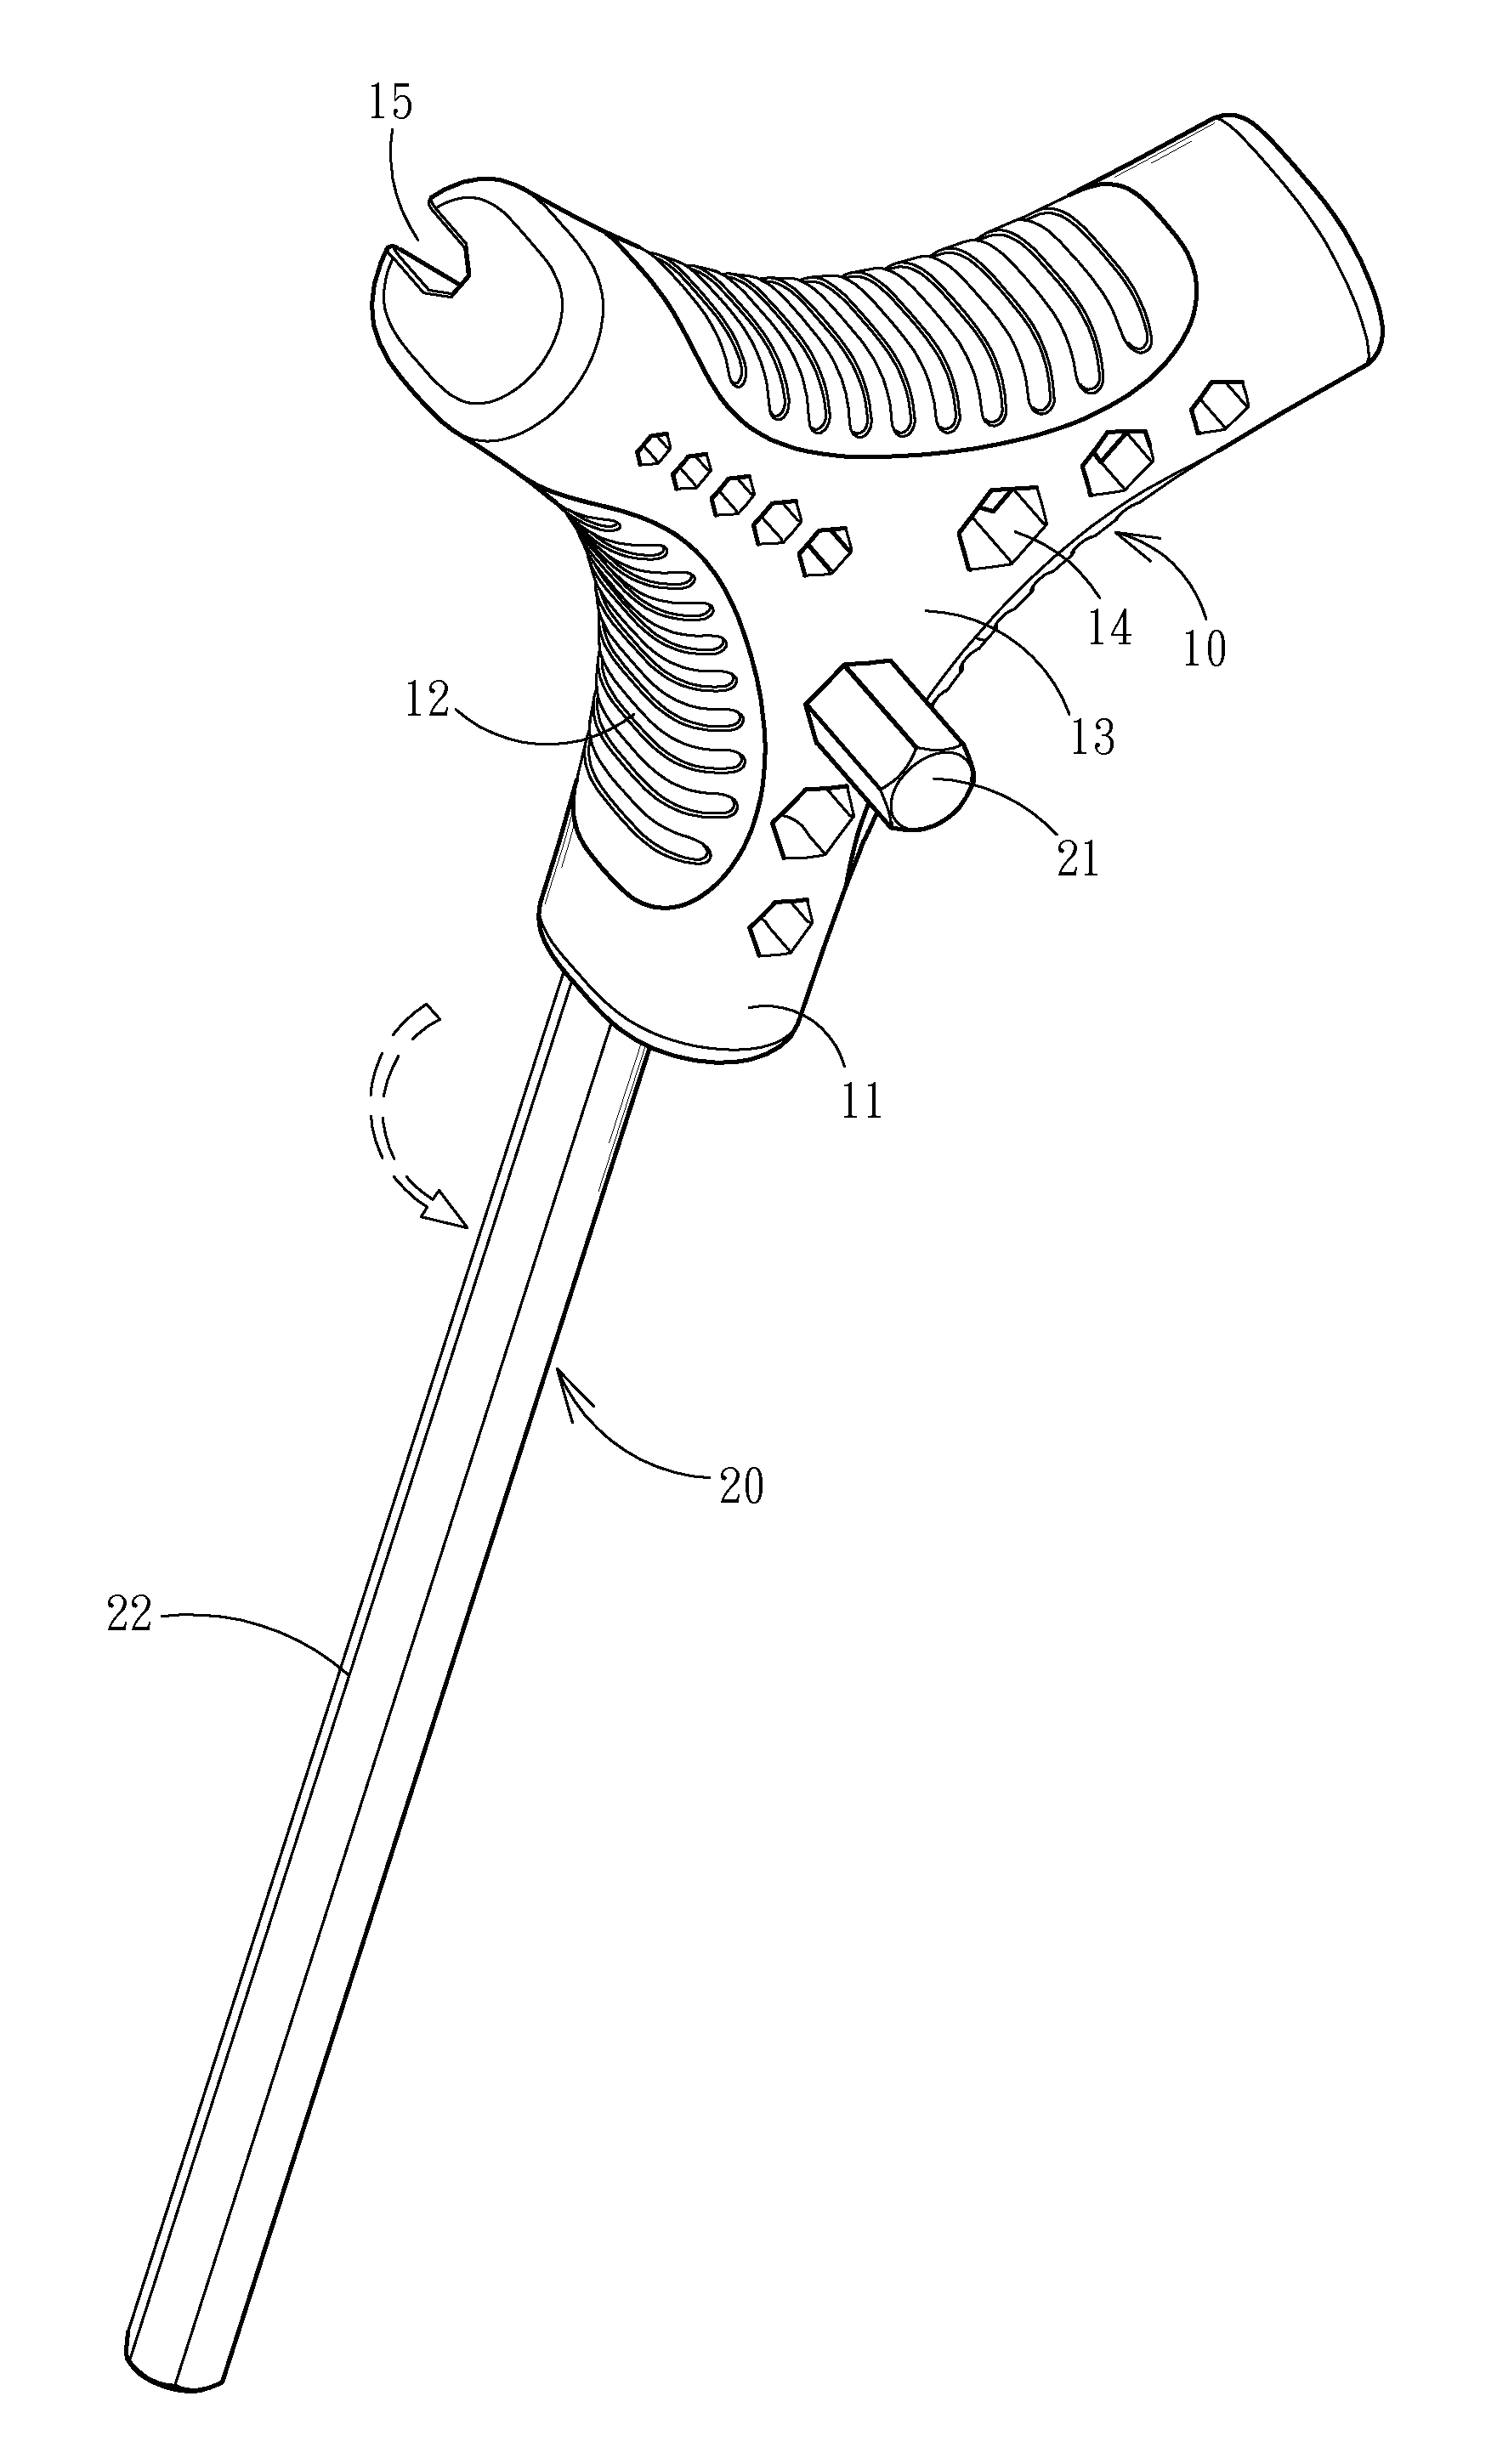 Hexagon spanner handle for increasing turning force